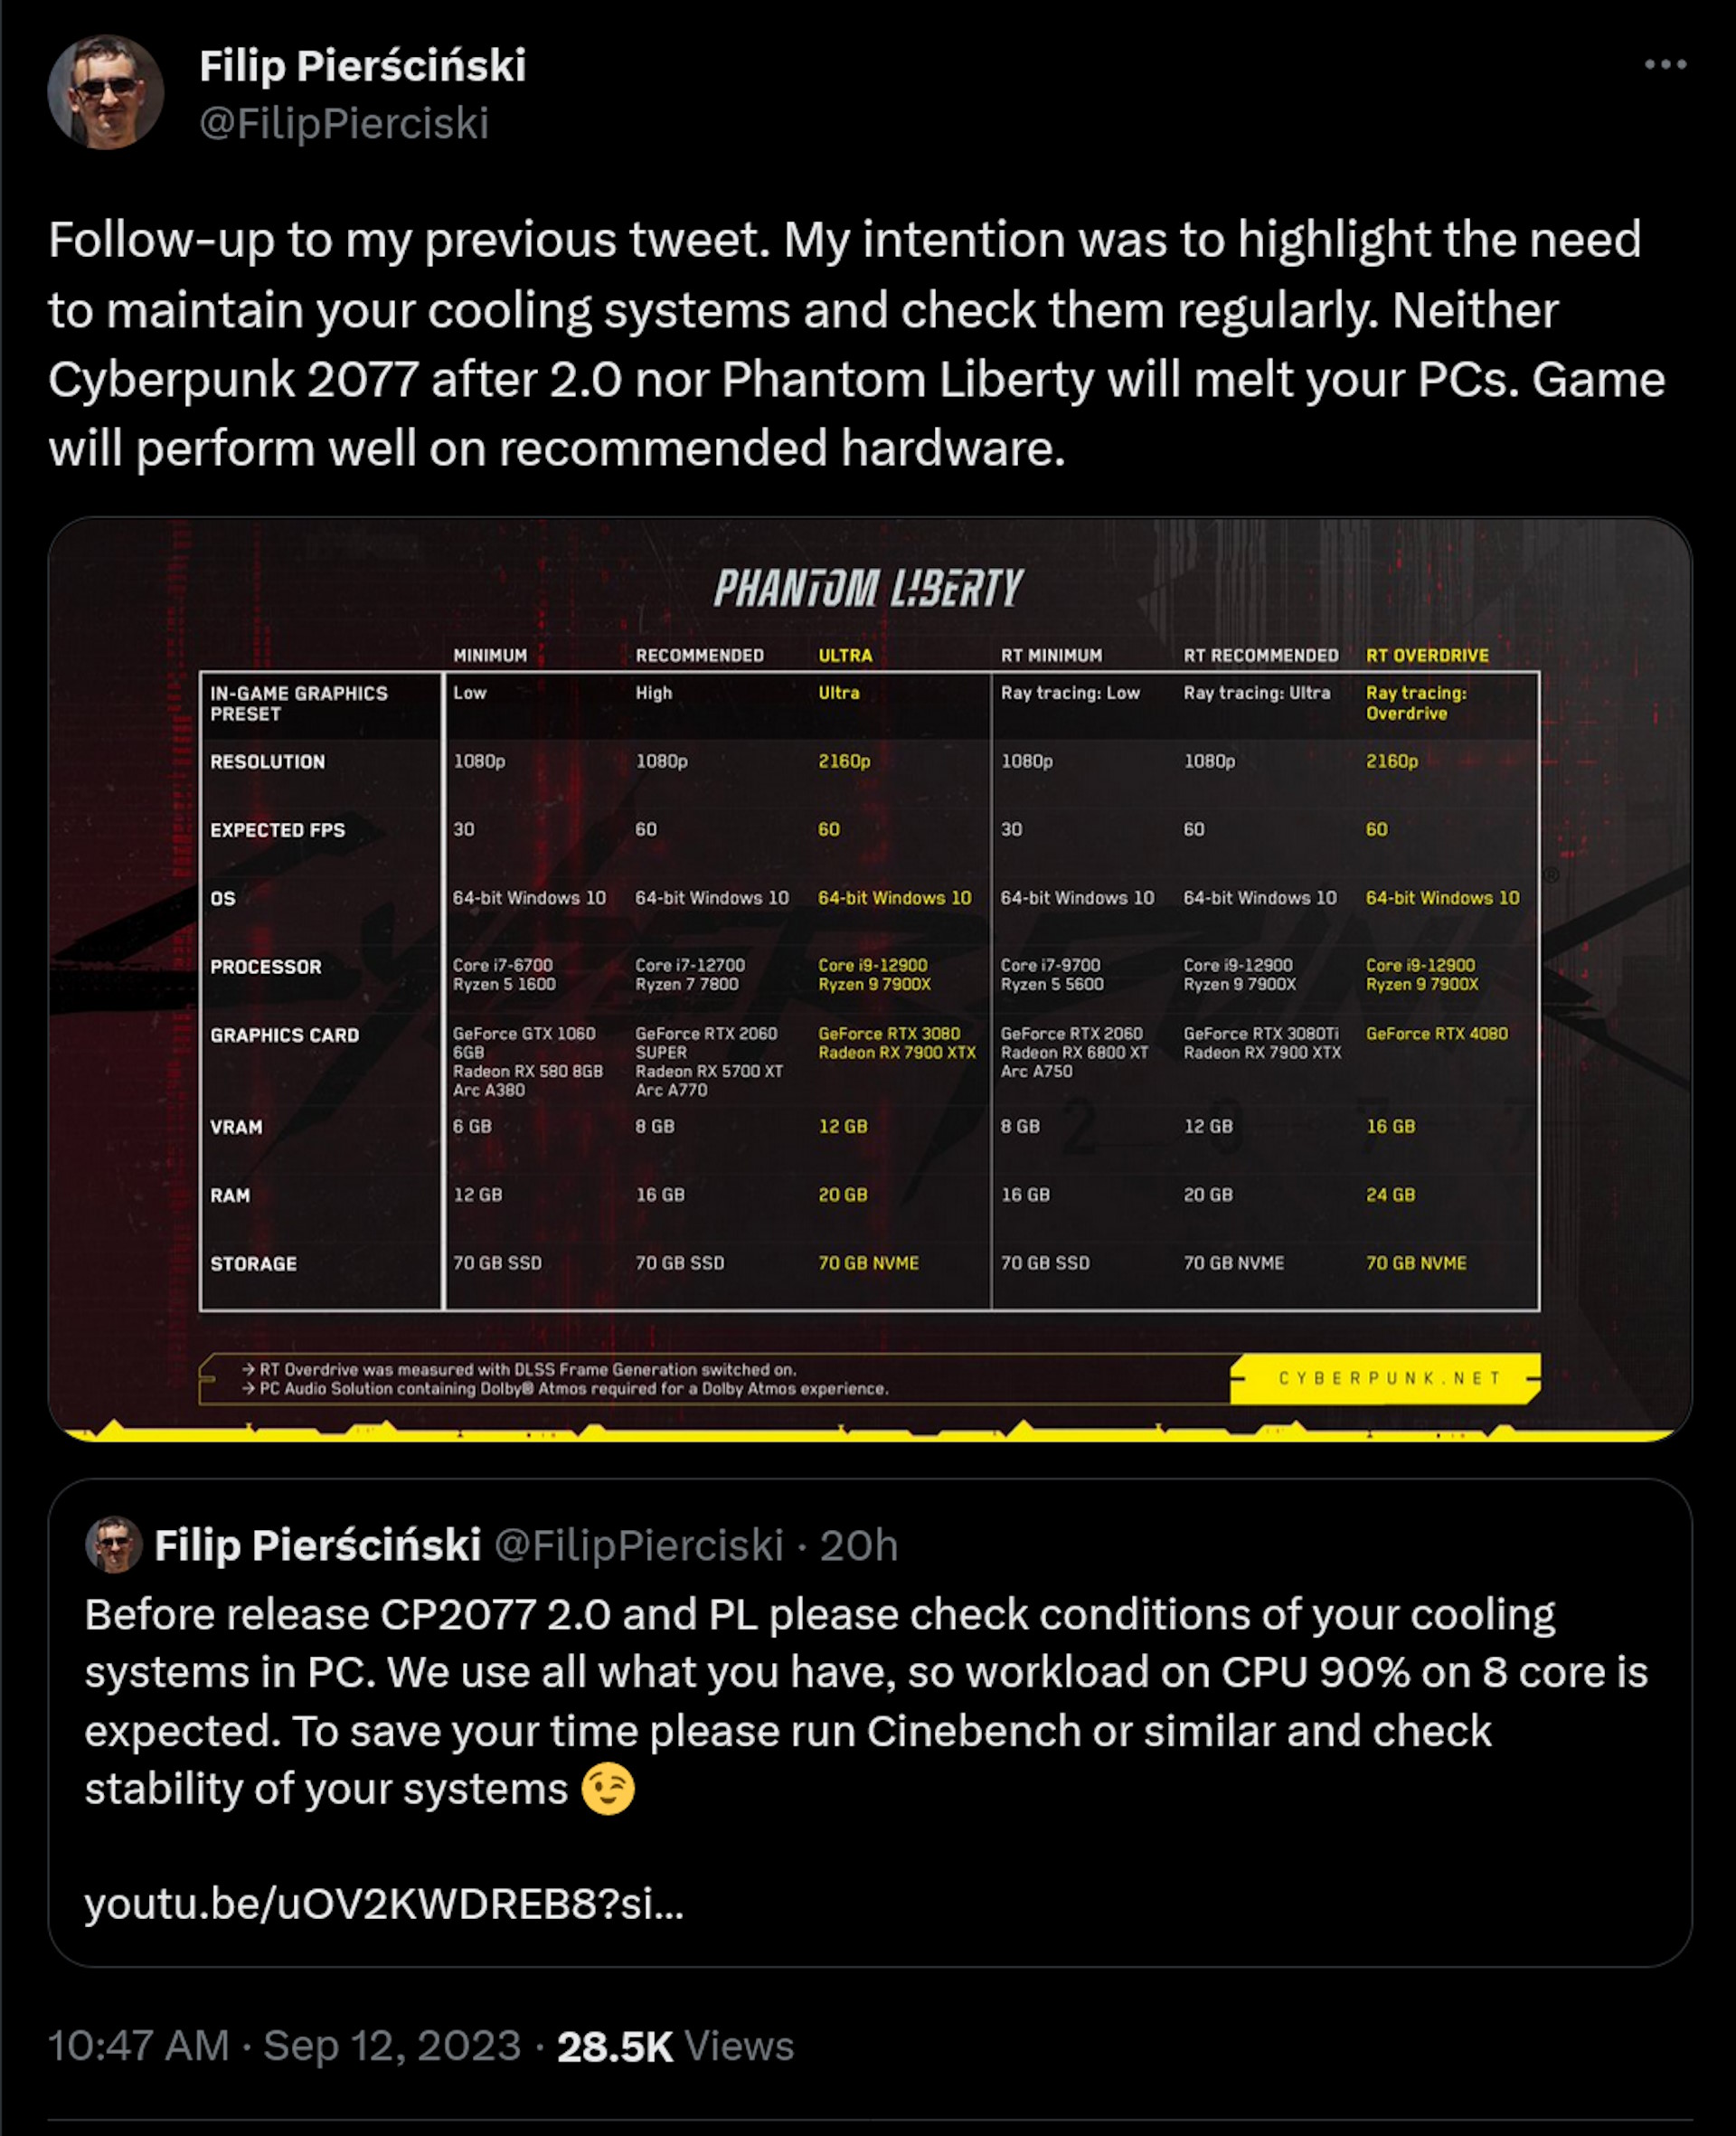 Follow-up to my previous tweet. My intention was to highlight the need to maintain your cooling systems and check them regularly. Neither Cyberpunk 2077 after 2.0 nor Phantom Liberty will melt your PCs. Game will perform well on recommended hardware.